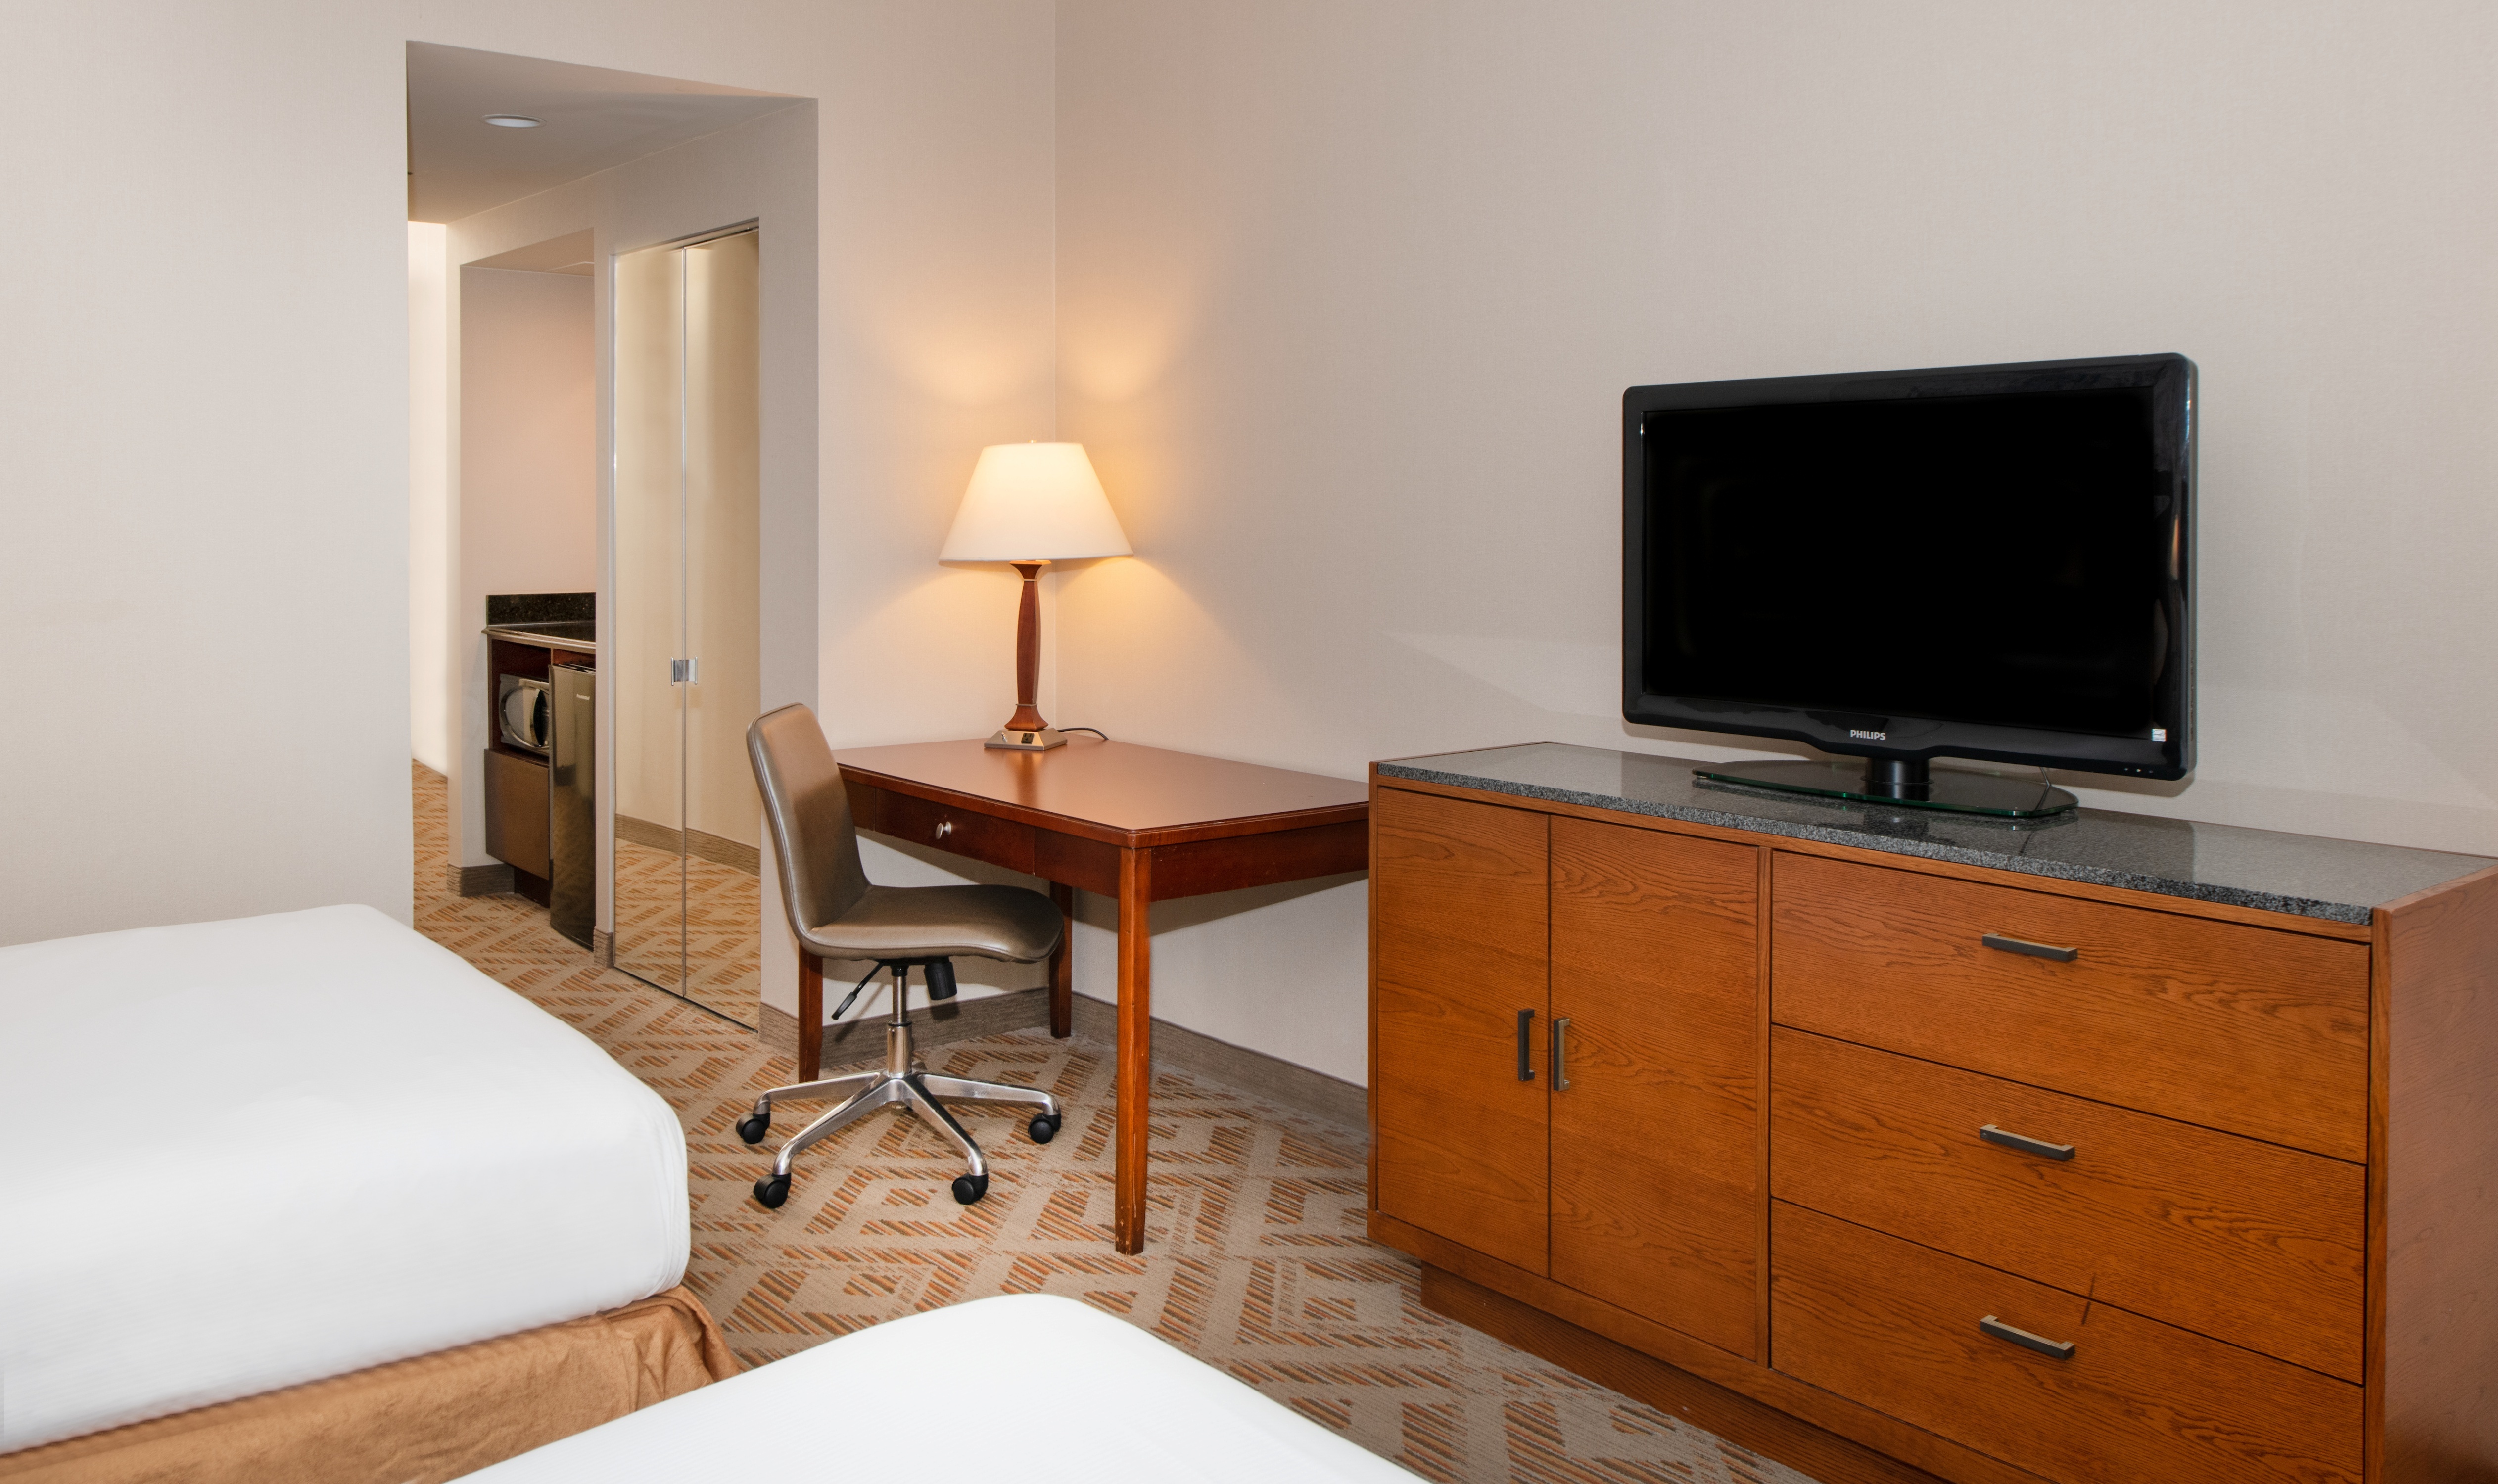 From family vacations to getaways with friends, our rooms are fully equipped for your travel needs.